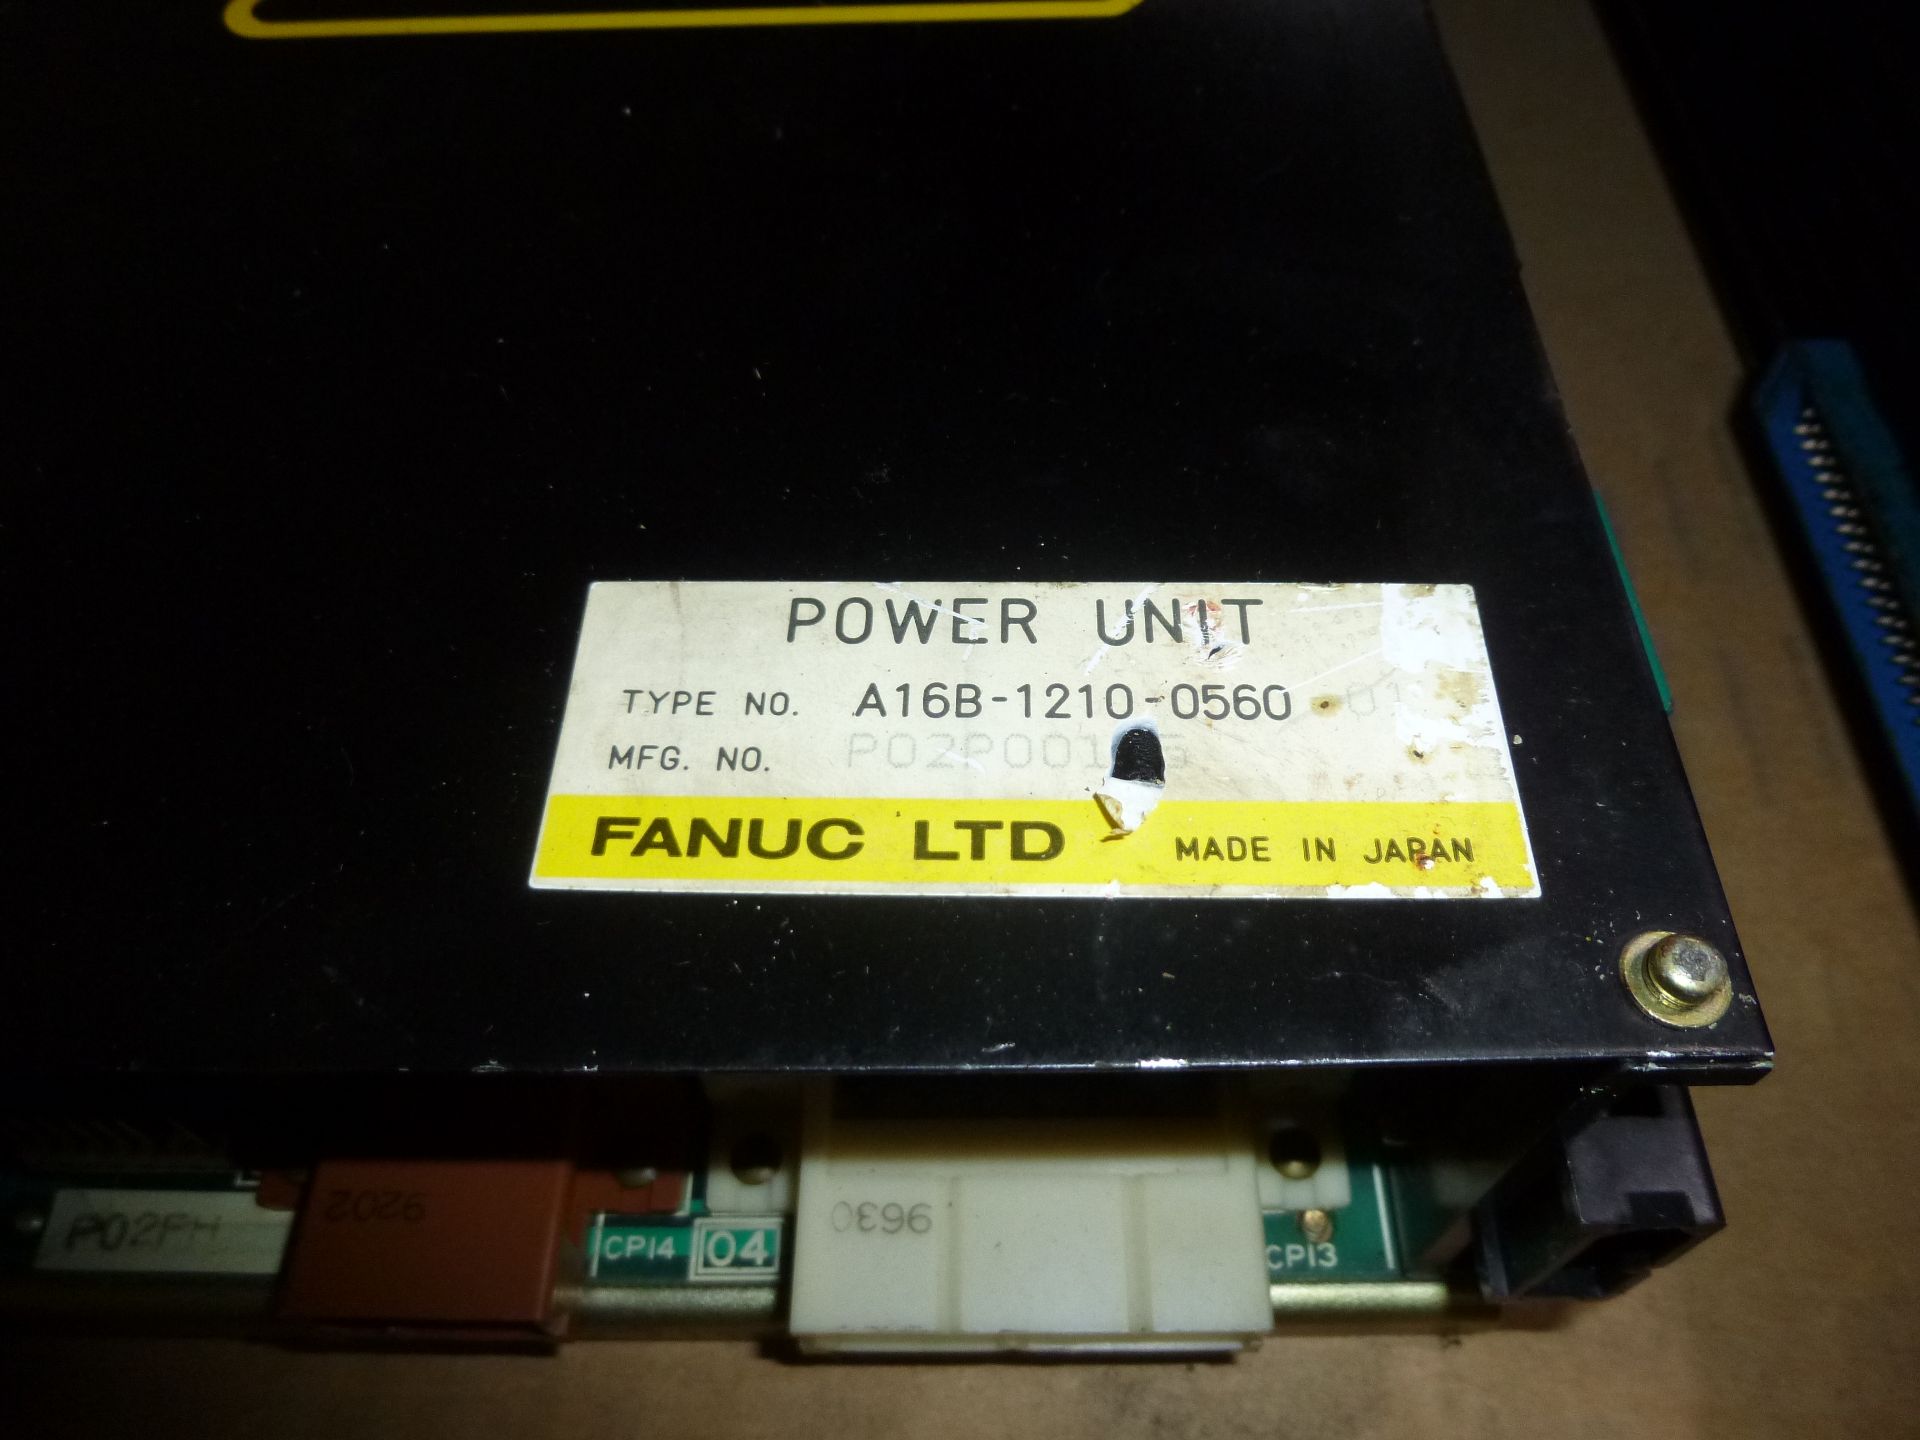 Fanuc power unit model A16B-1210-0560, as always with Brolyn LLC auctions, all lots can be picked up - Image 2 of 3